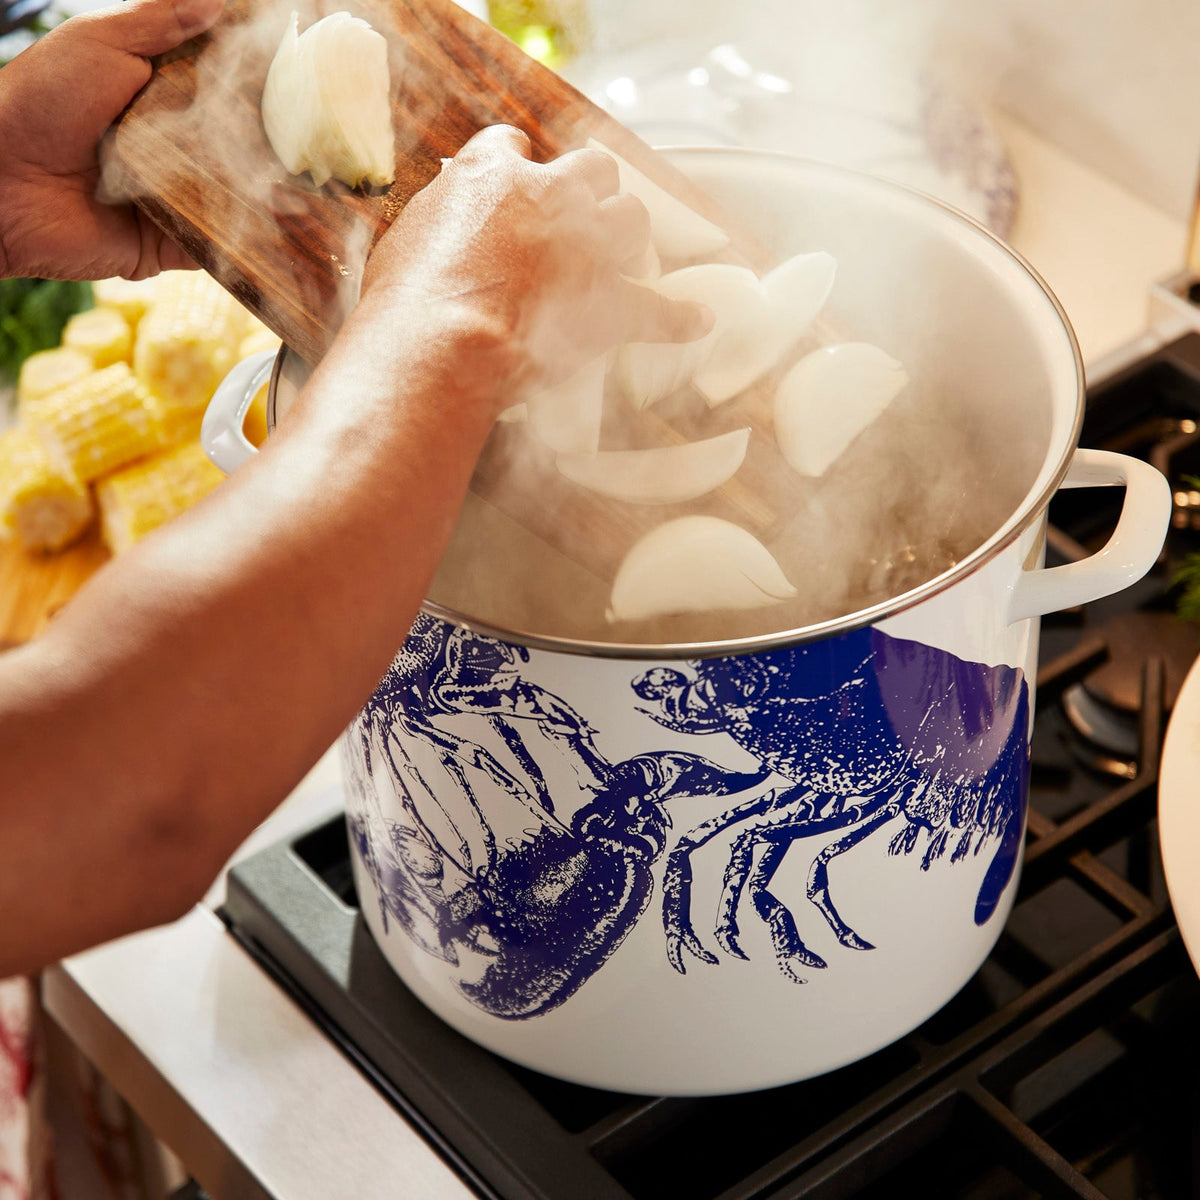 A person is preparing lobster in a Caskata X Cuisinart Limited Edition Lobster 16 Qt. Enamel on Steel Stockpot on the stove.